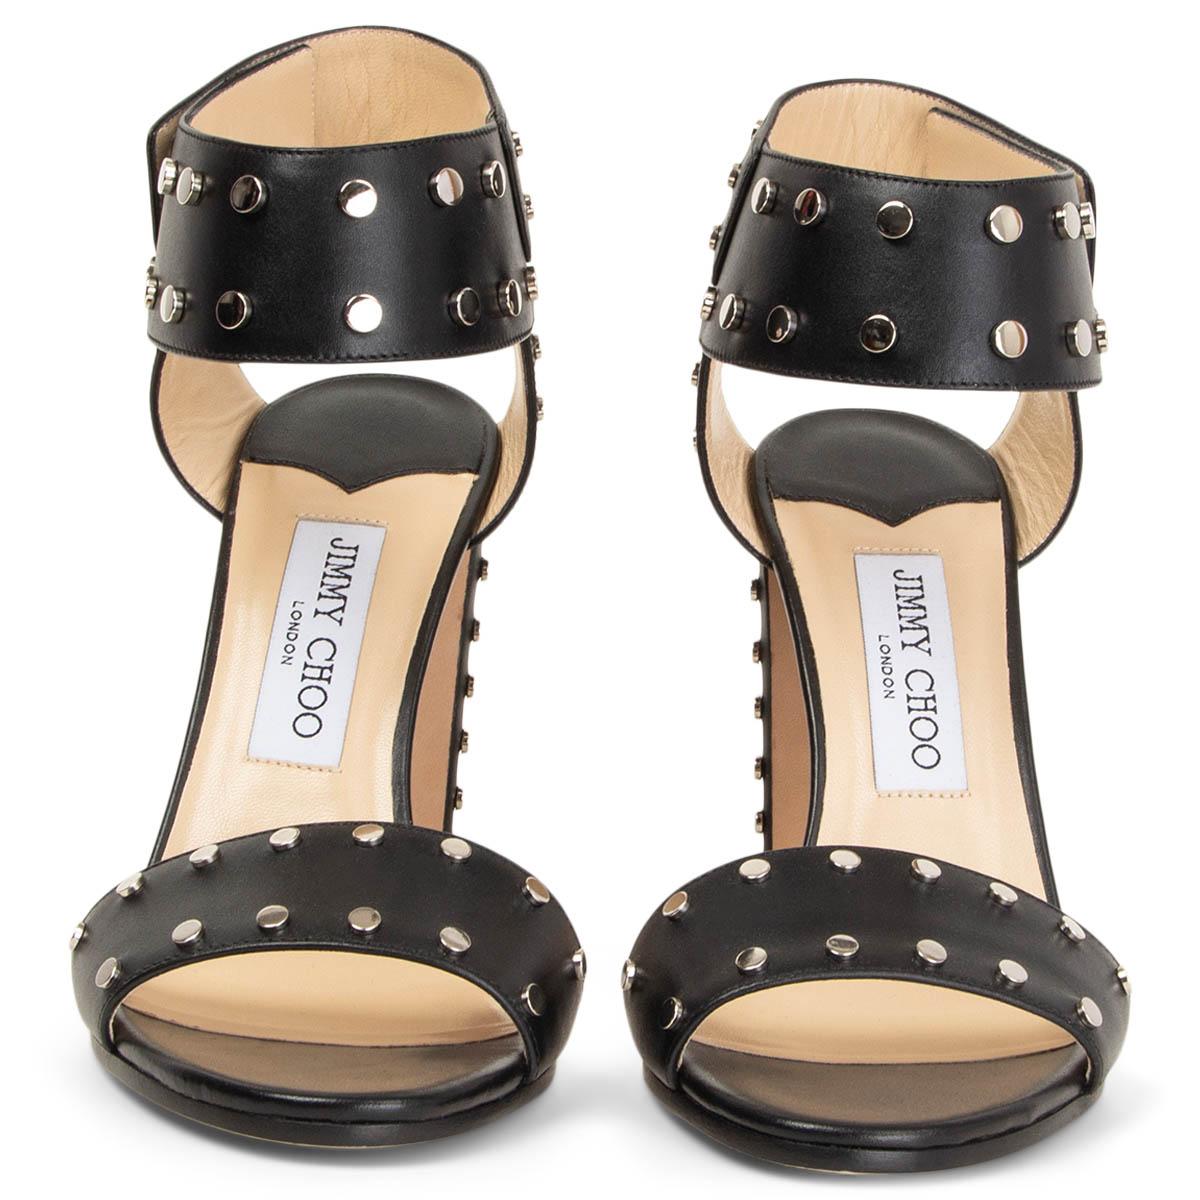 100% authentic Jimmy Choo Veto 100 ankle-strap sandals in black leather embellished with silver-tone studs. Brand new. 

Measurements
Imprinted Size	39
Shoe Size	39
Inside Sole	25.5cm (9.9in)
Width	8cm (3.1in)
Heel	10cm (3.9in)
Top